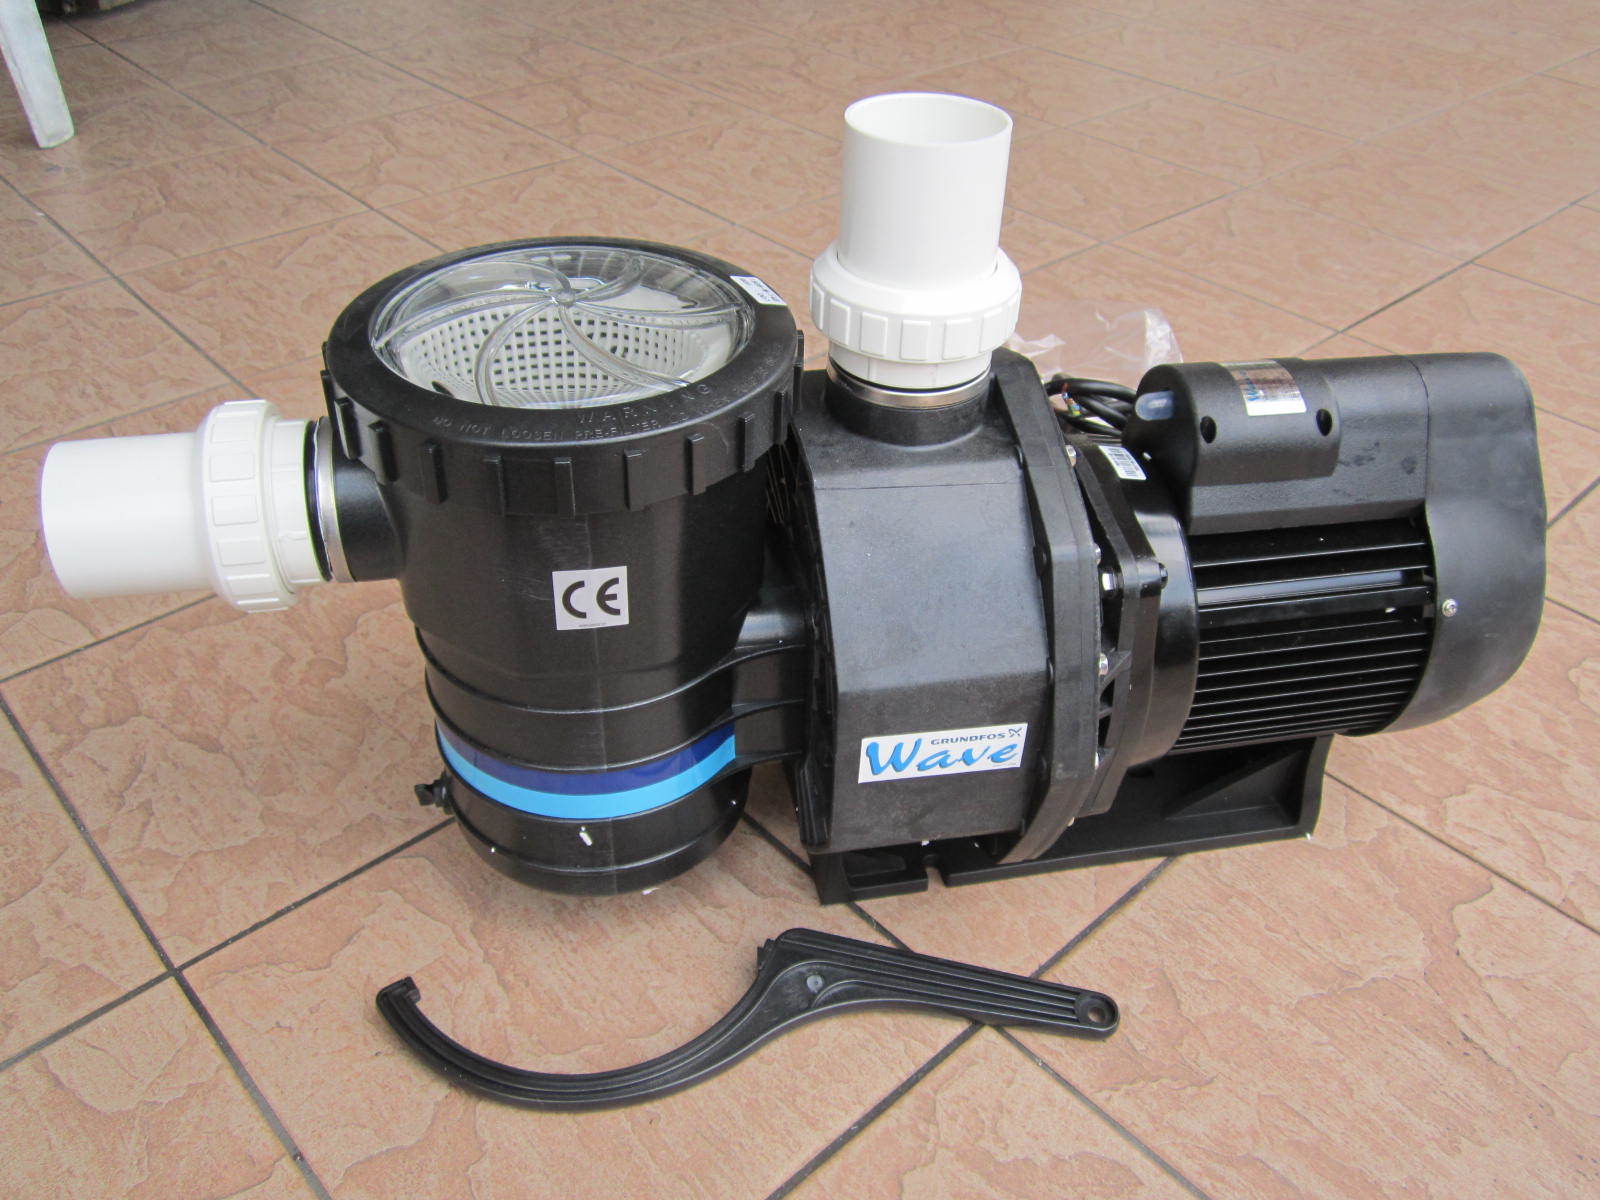 Grundfos Wave 2.0HP Centrifugal Swimming Pool Pumps – MY Power Tools